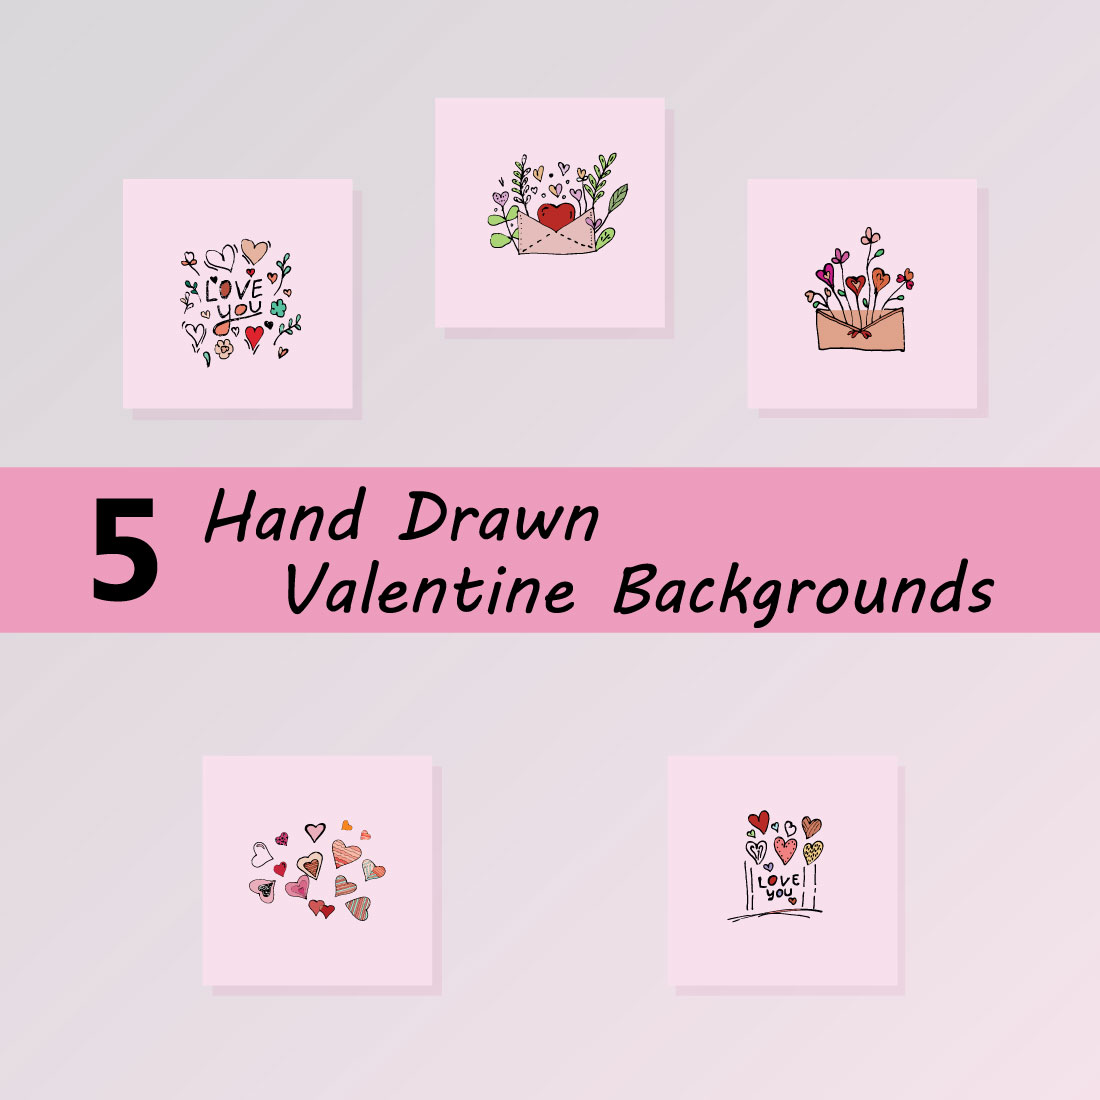 5 Hand Drawn Valentine Backgrounds preview image.